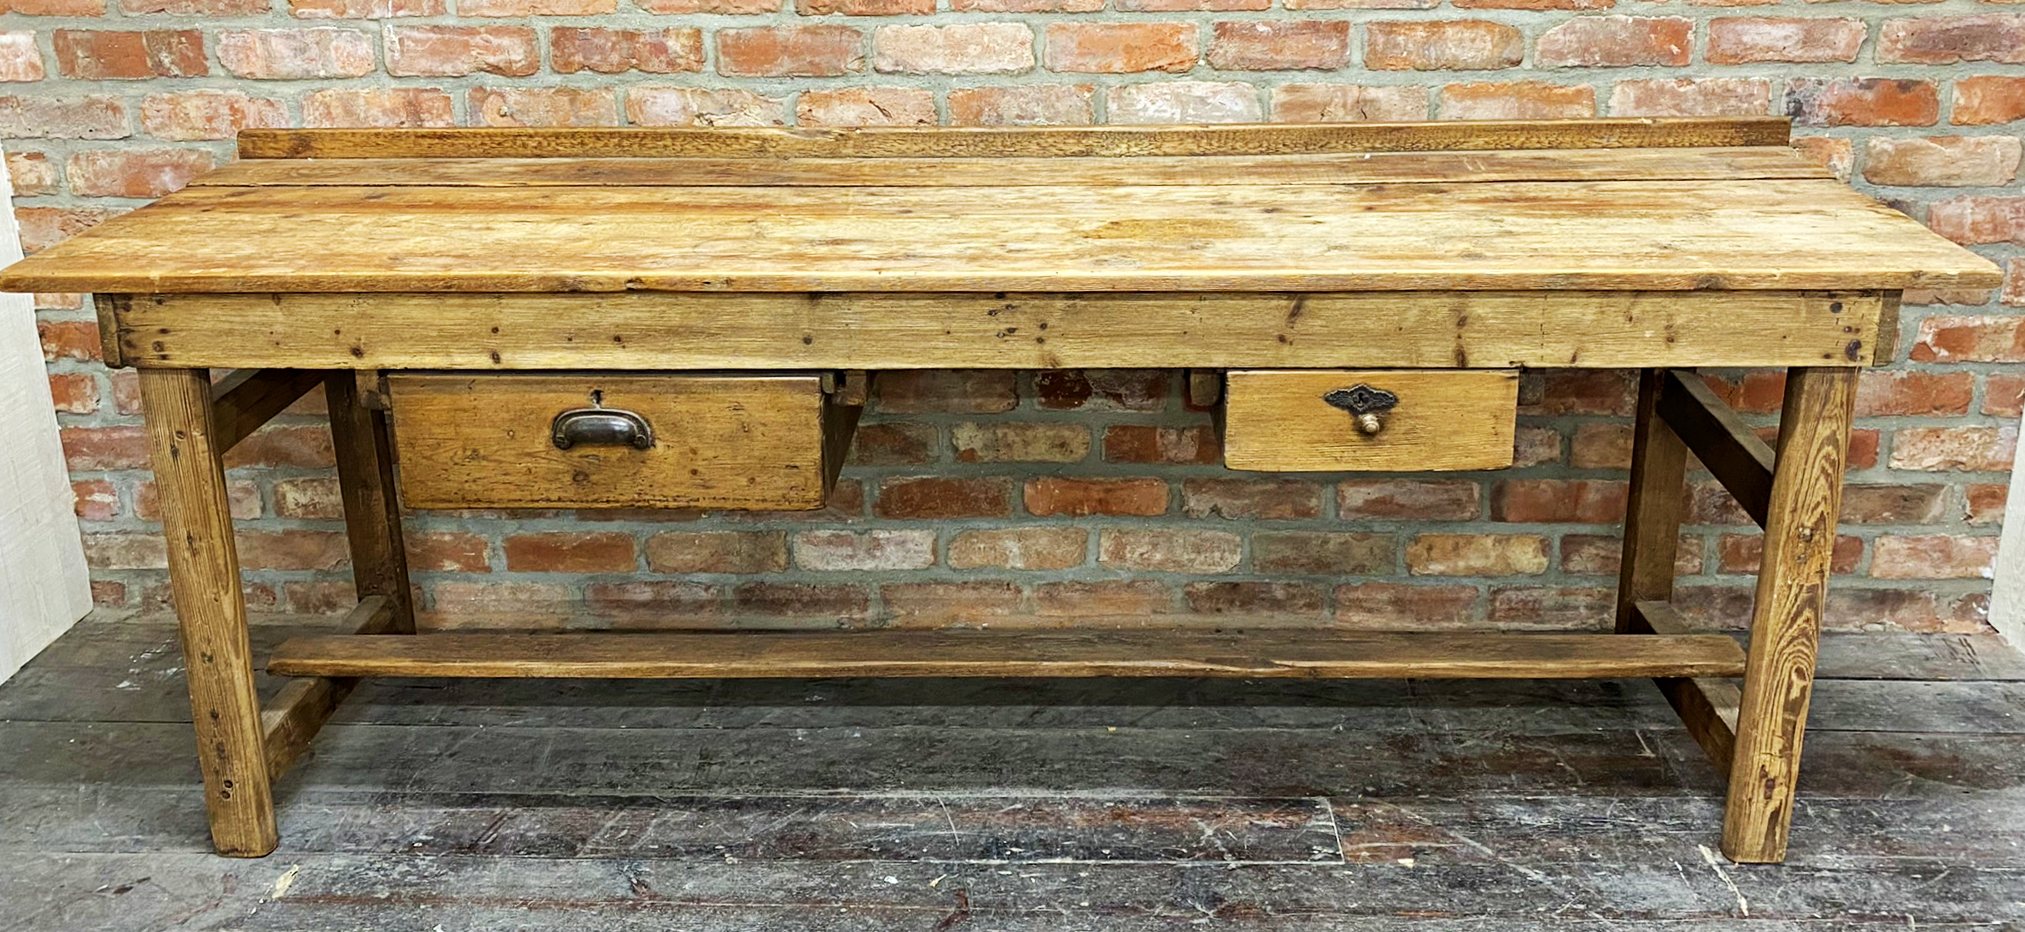 Victorian pine work or side table, raised back and panelled top, fitted with two drawers, 224cm long - Image 2 of 6